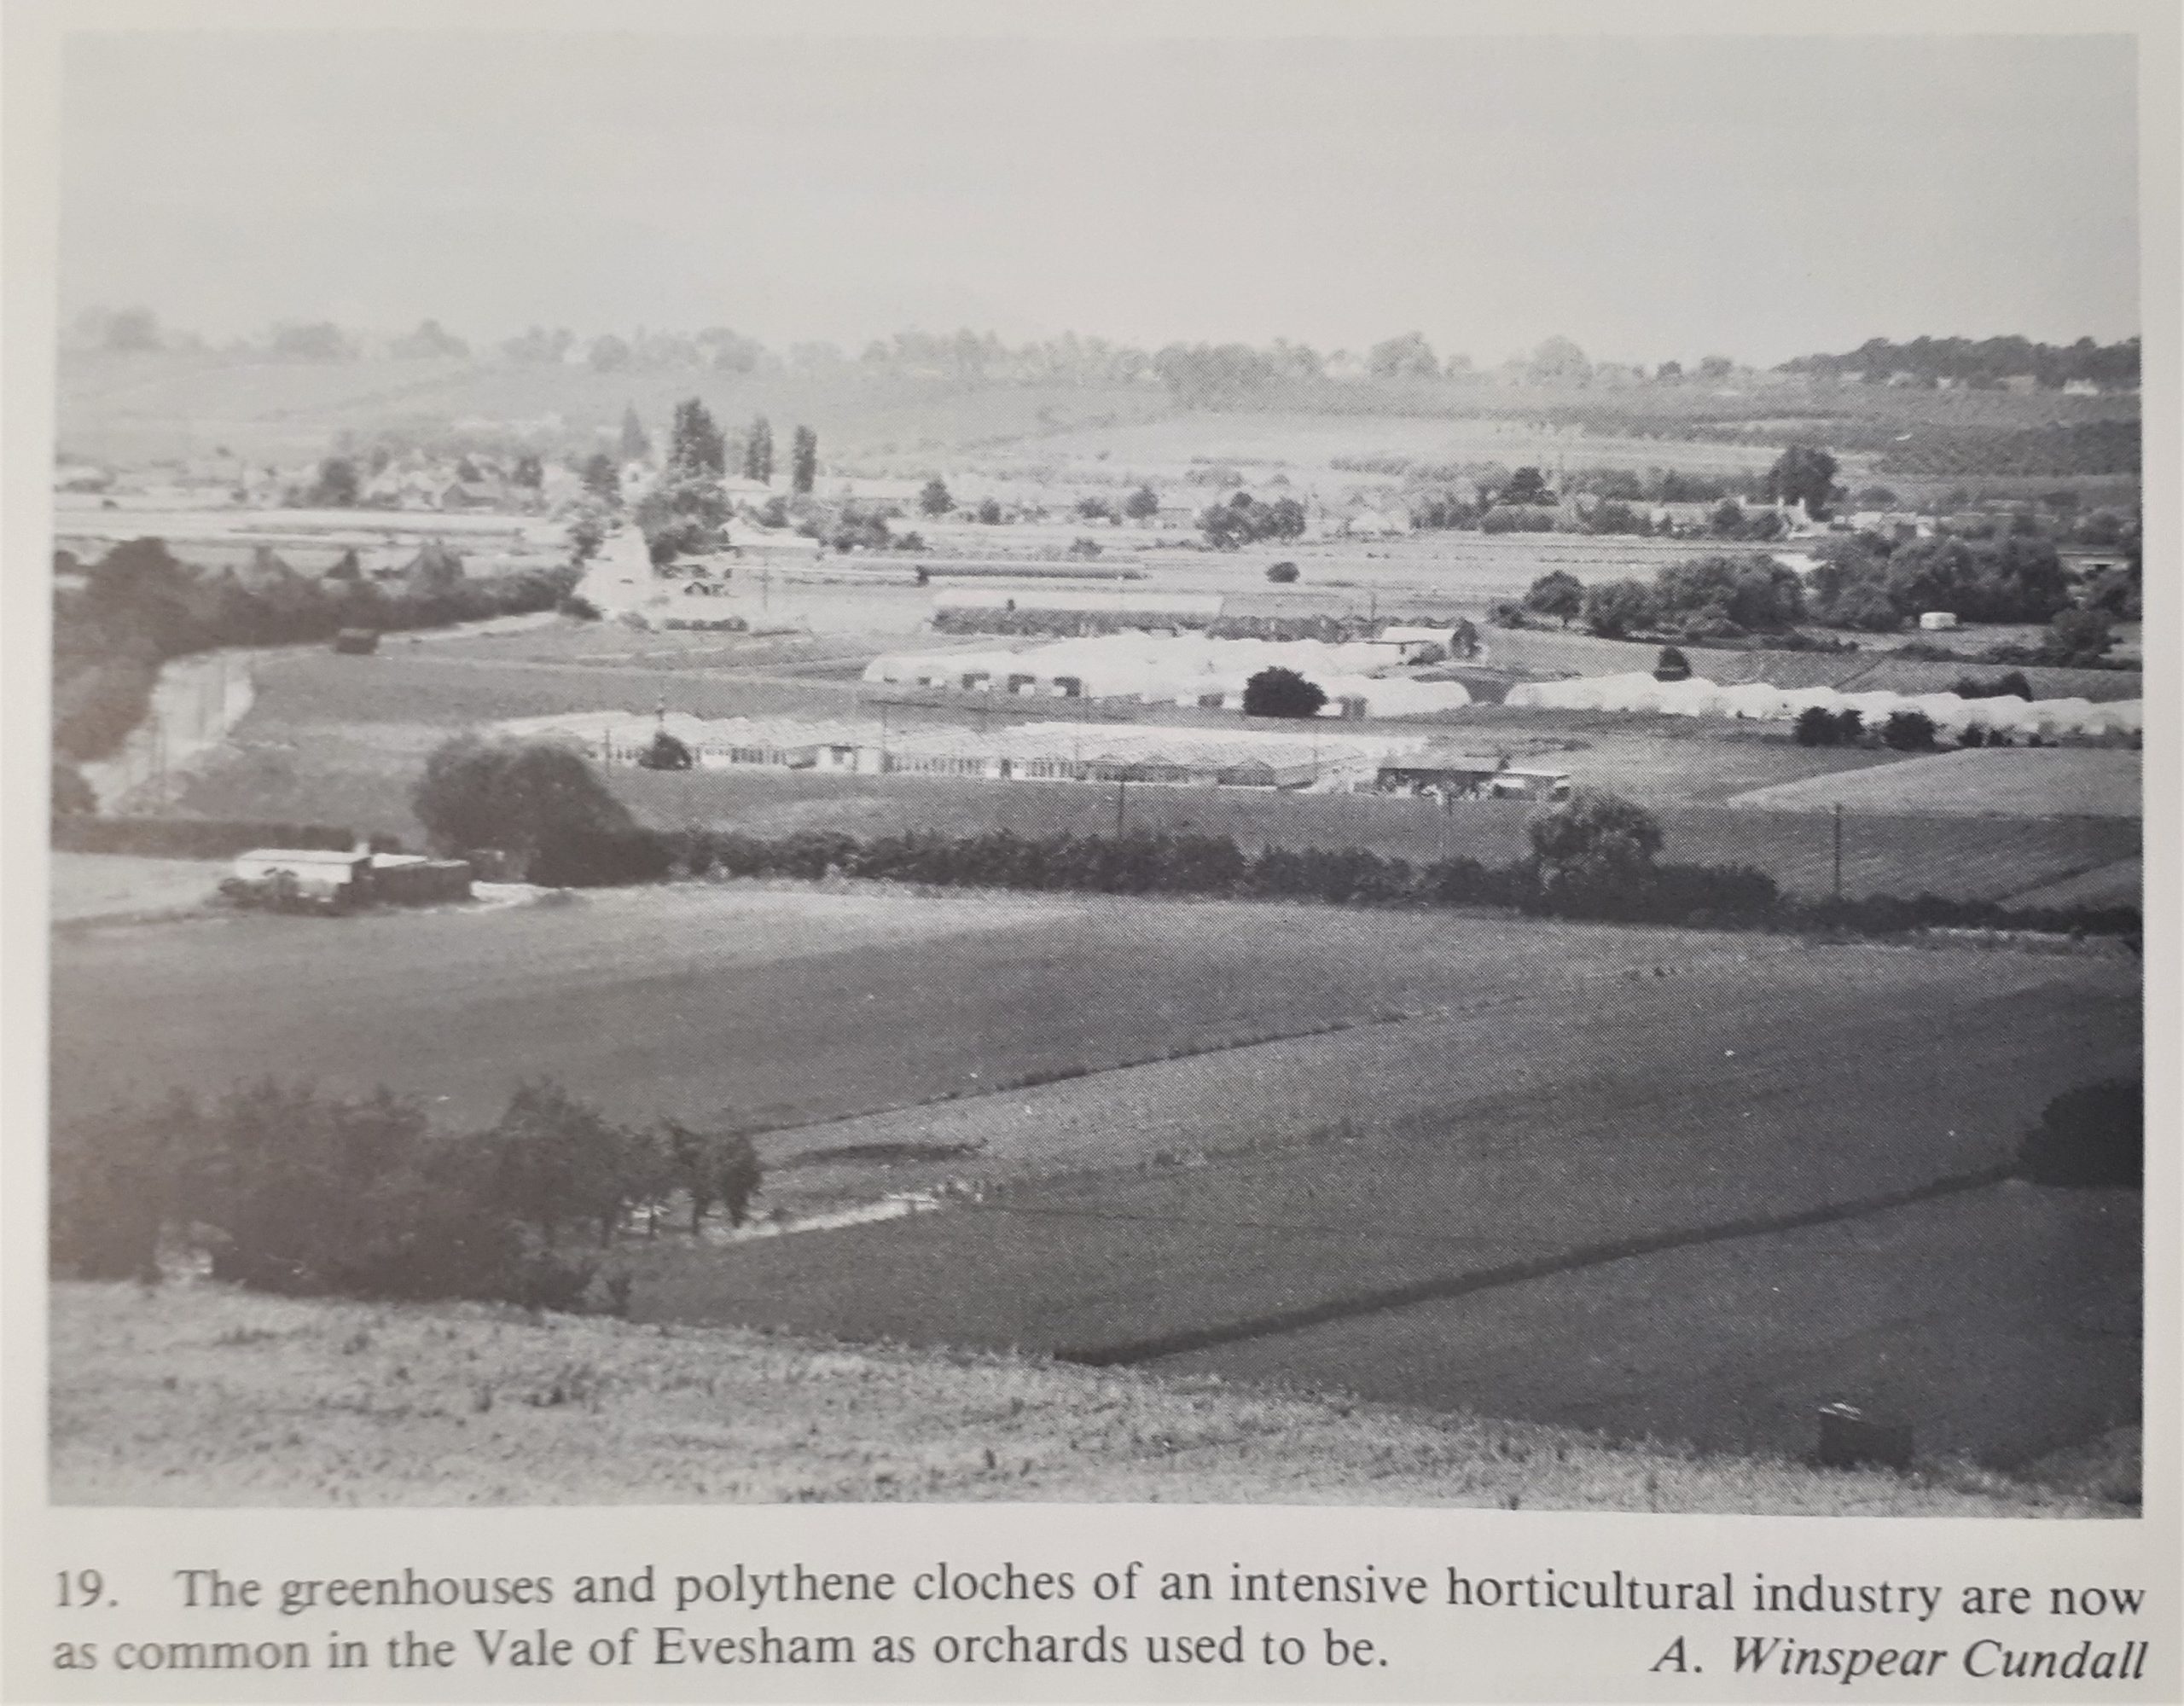 The greenhouses and polythene cloches of the Vale of Evesham in The Birds of West Midlands p91 © West Midlands Bird Club 1982